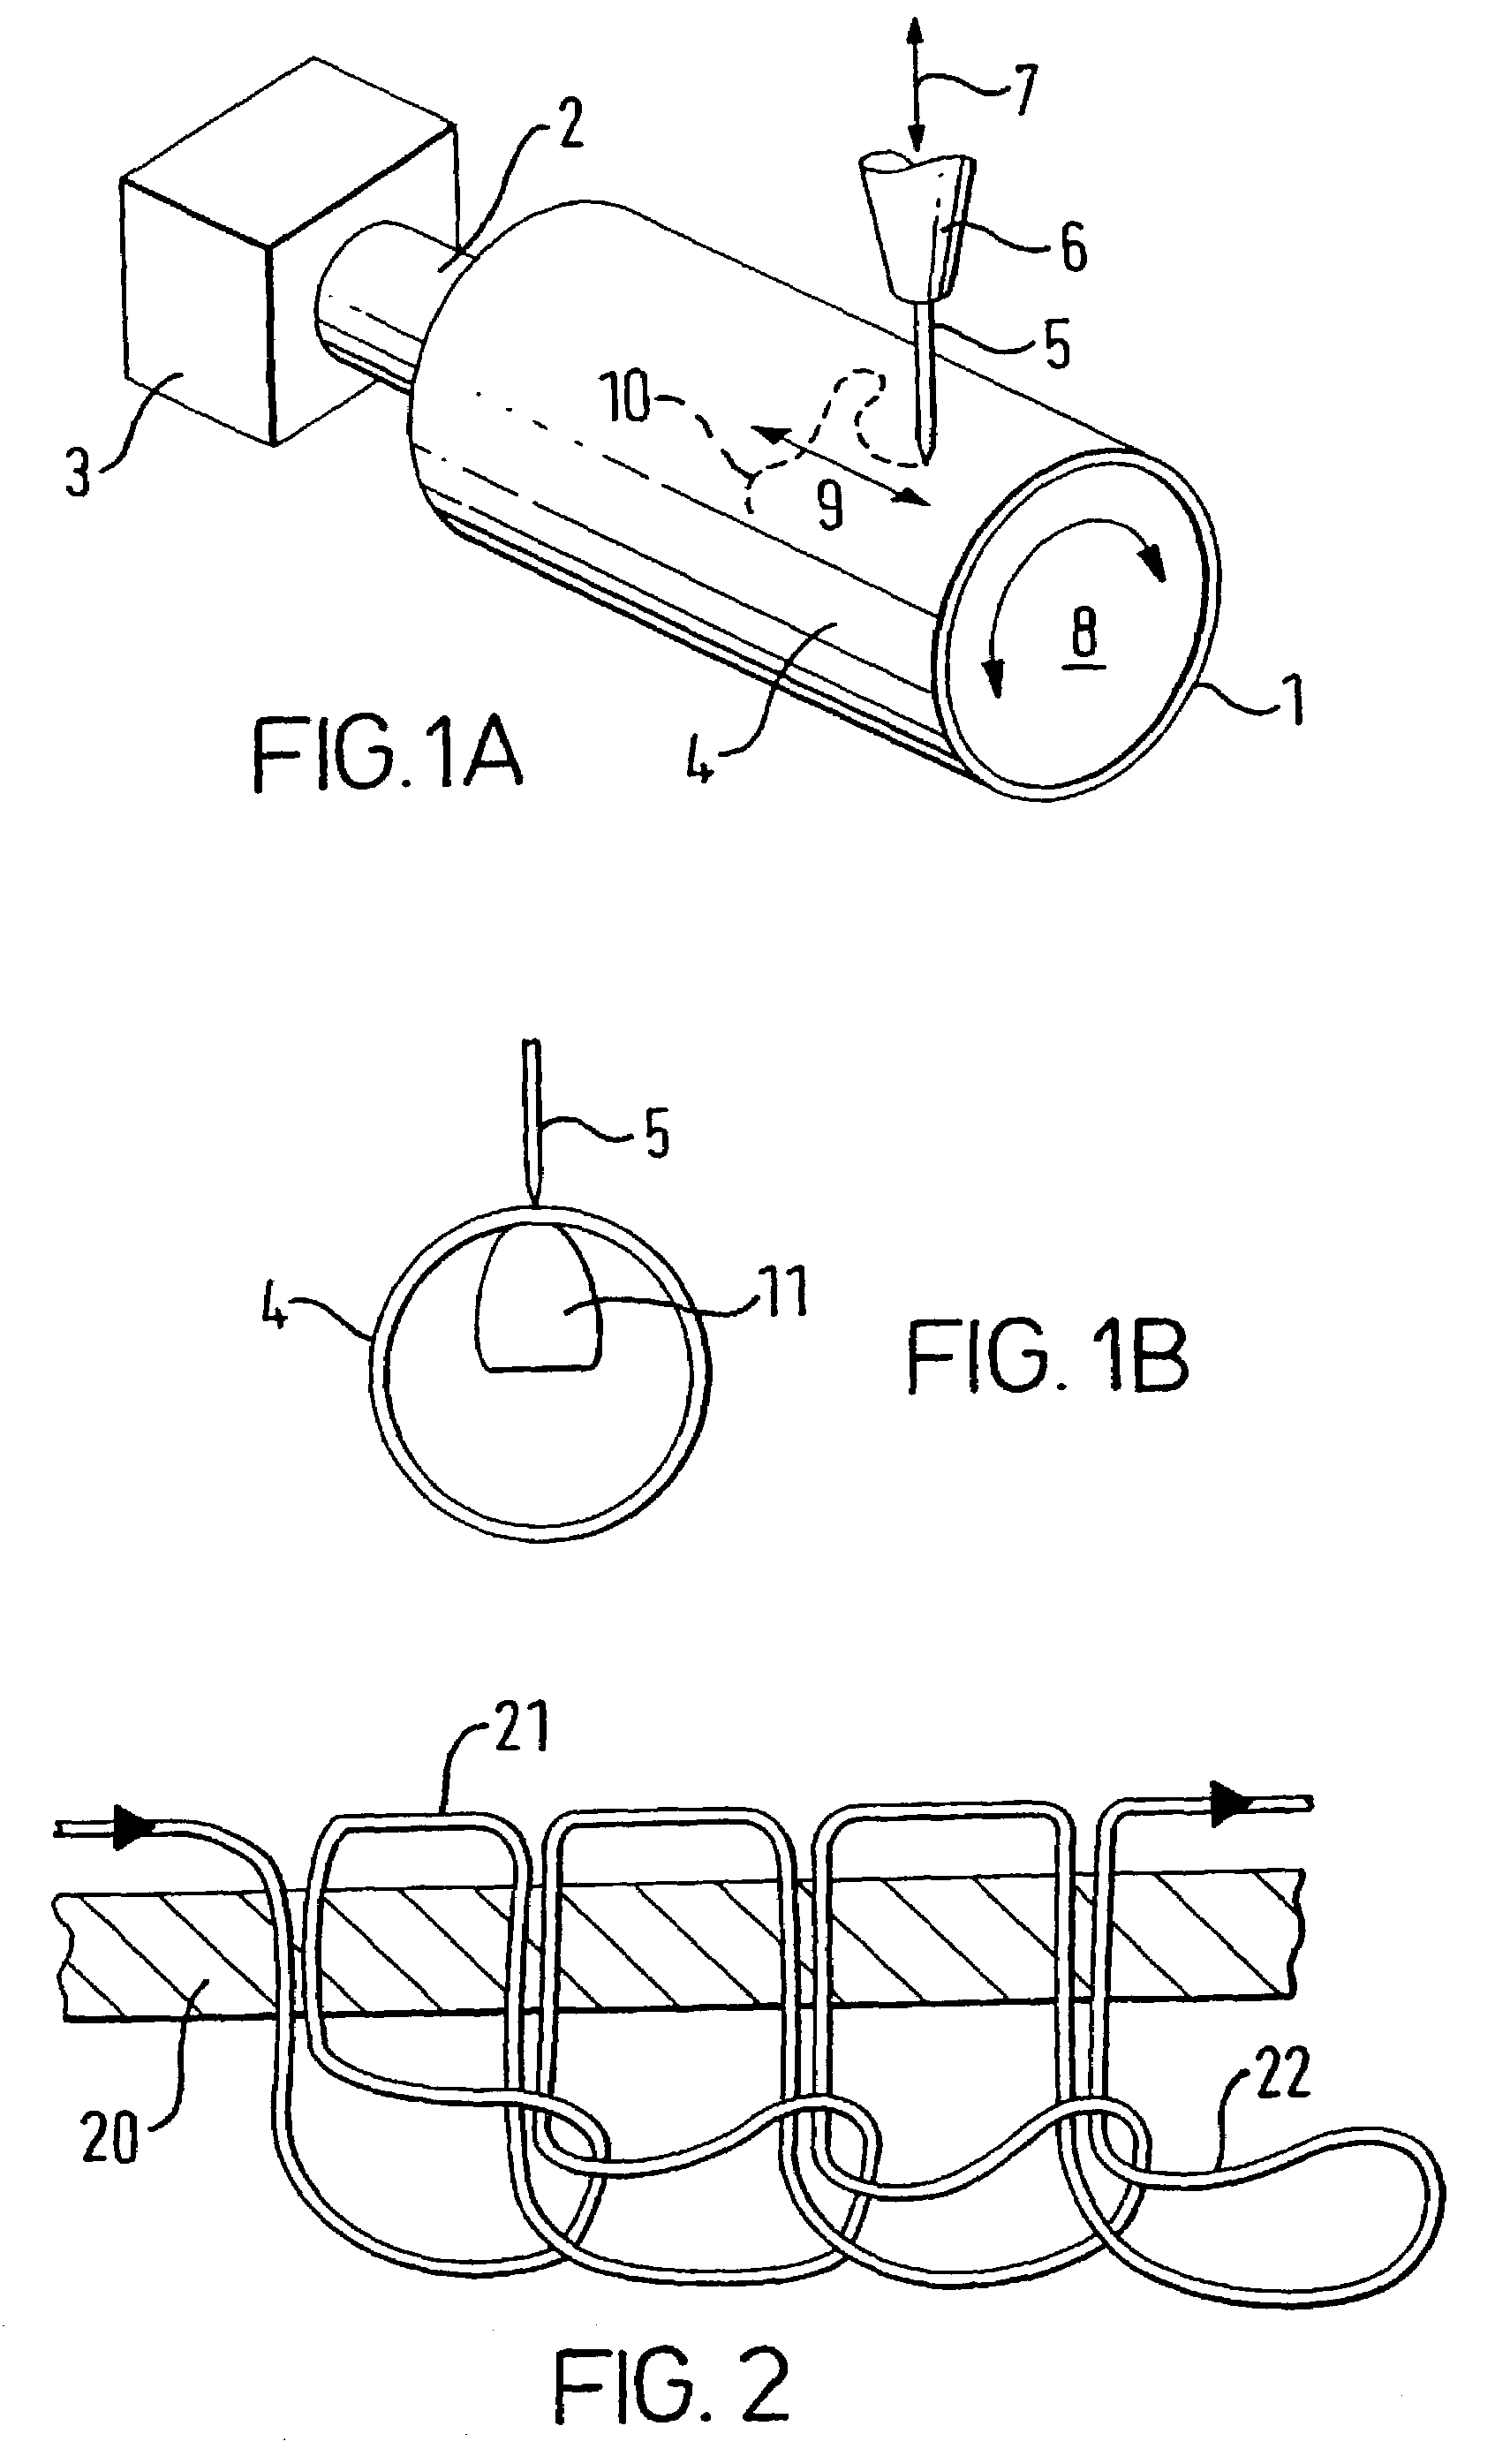 Method for manufacturing a medical implant